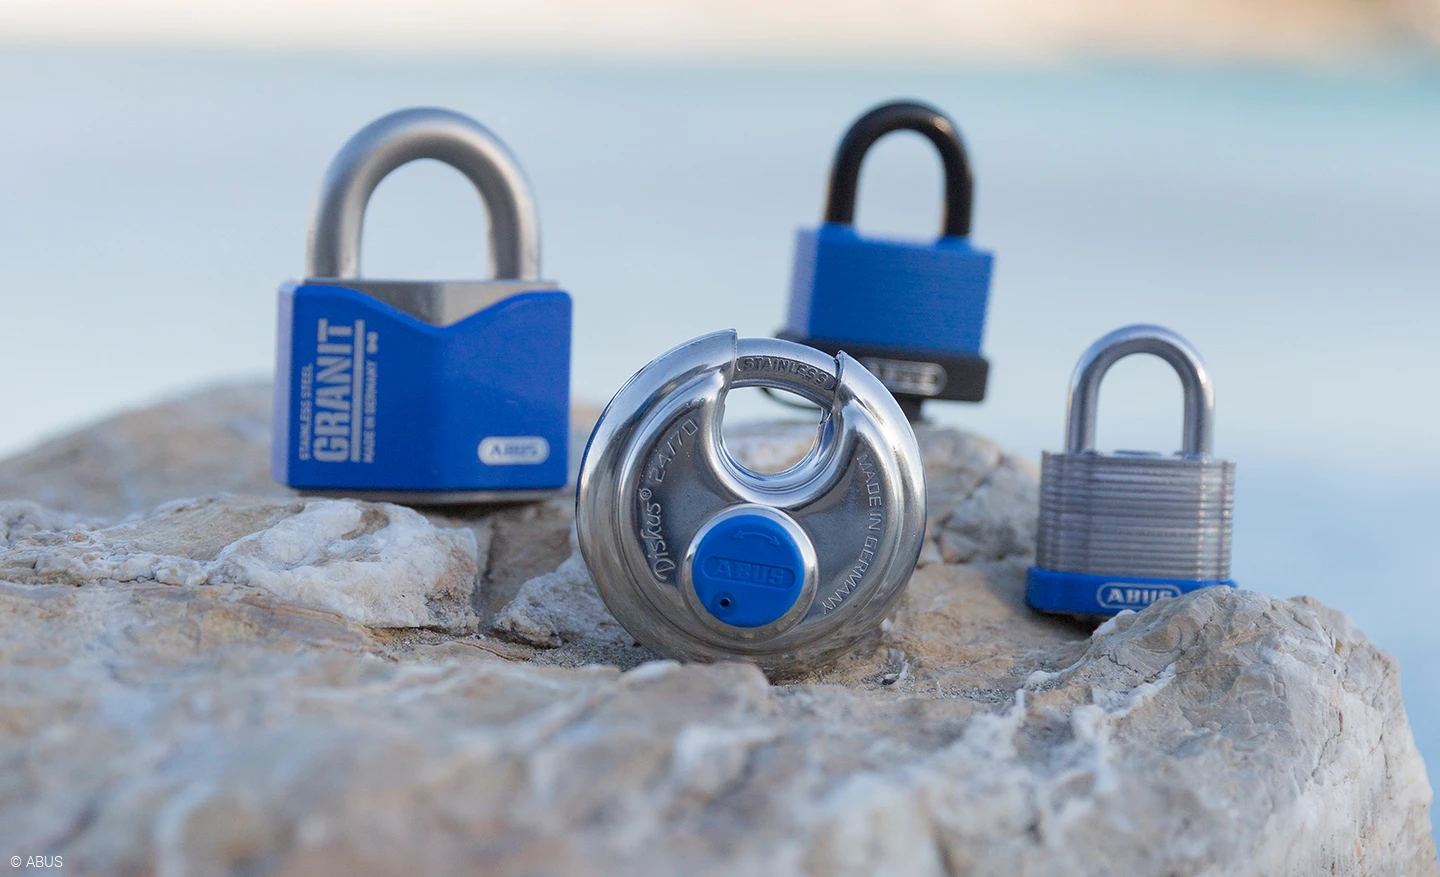 Products | Home- and Mobile Security | ABUS